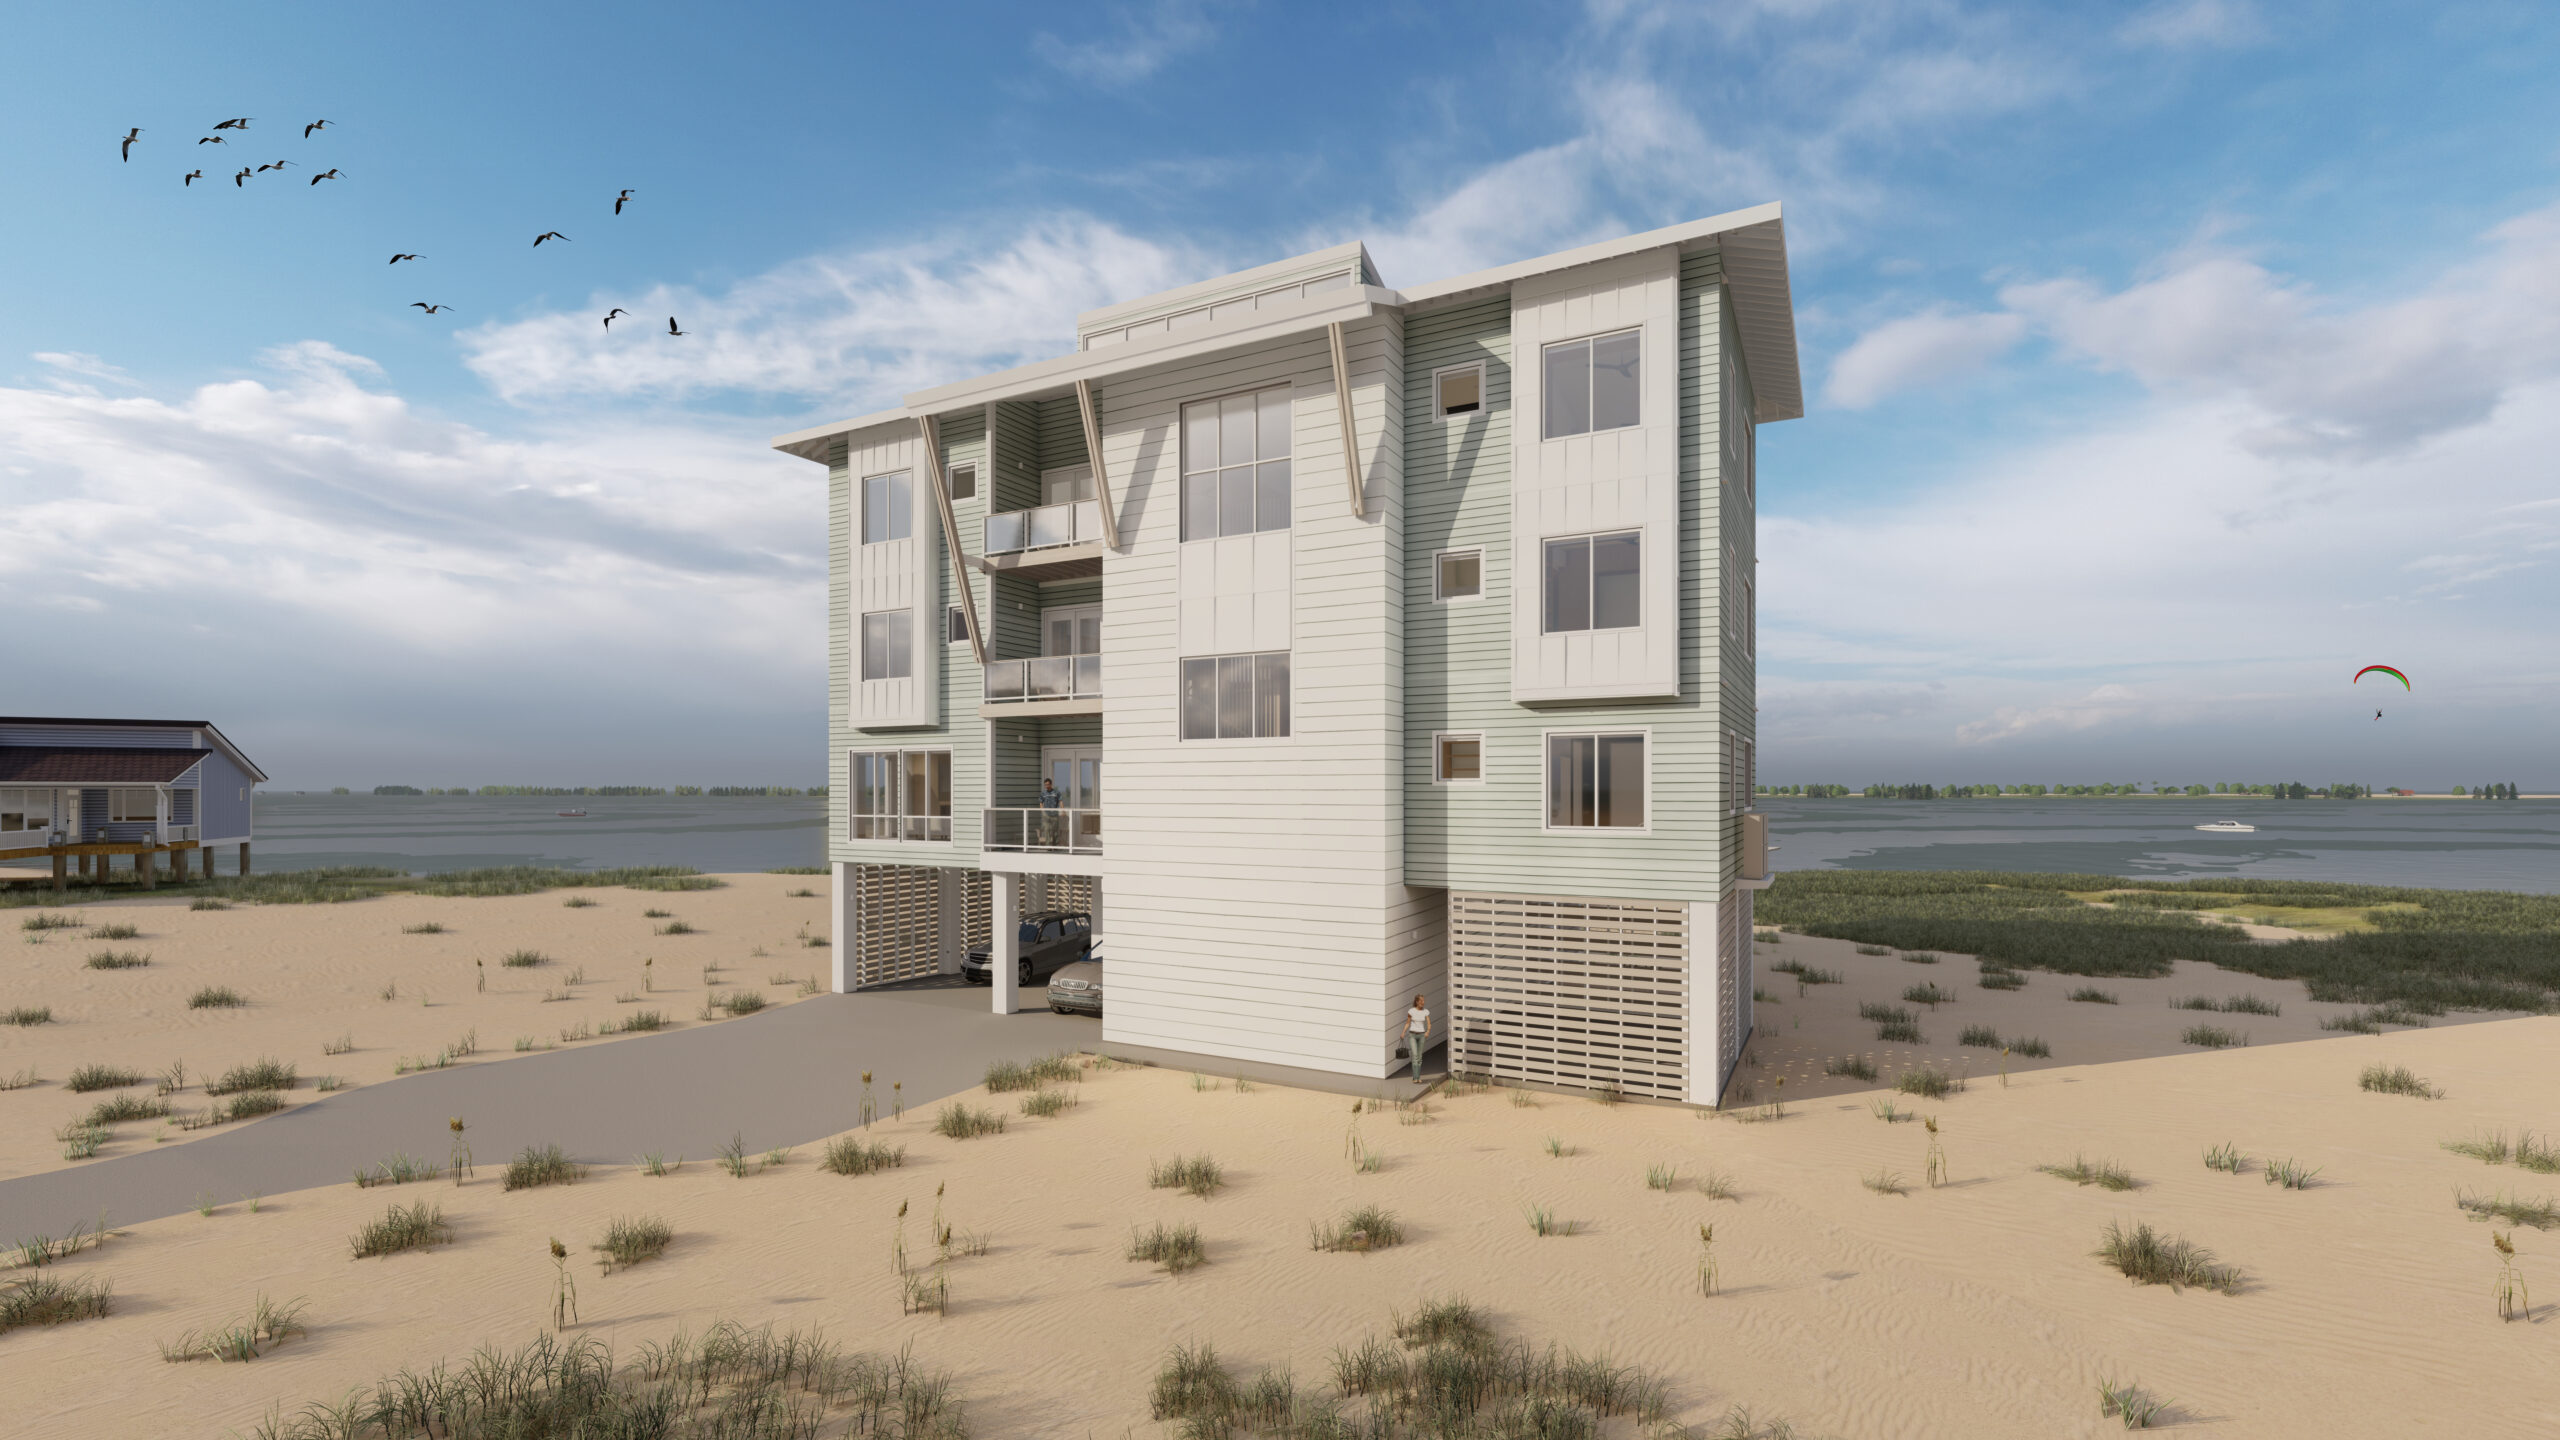 Rendering of a beach house with a roof that extends to shade the windows.